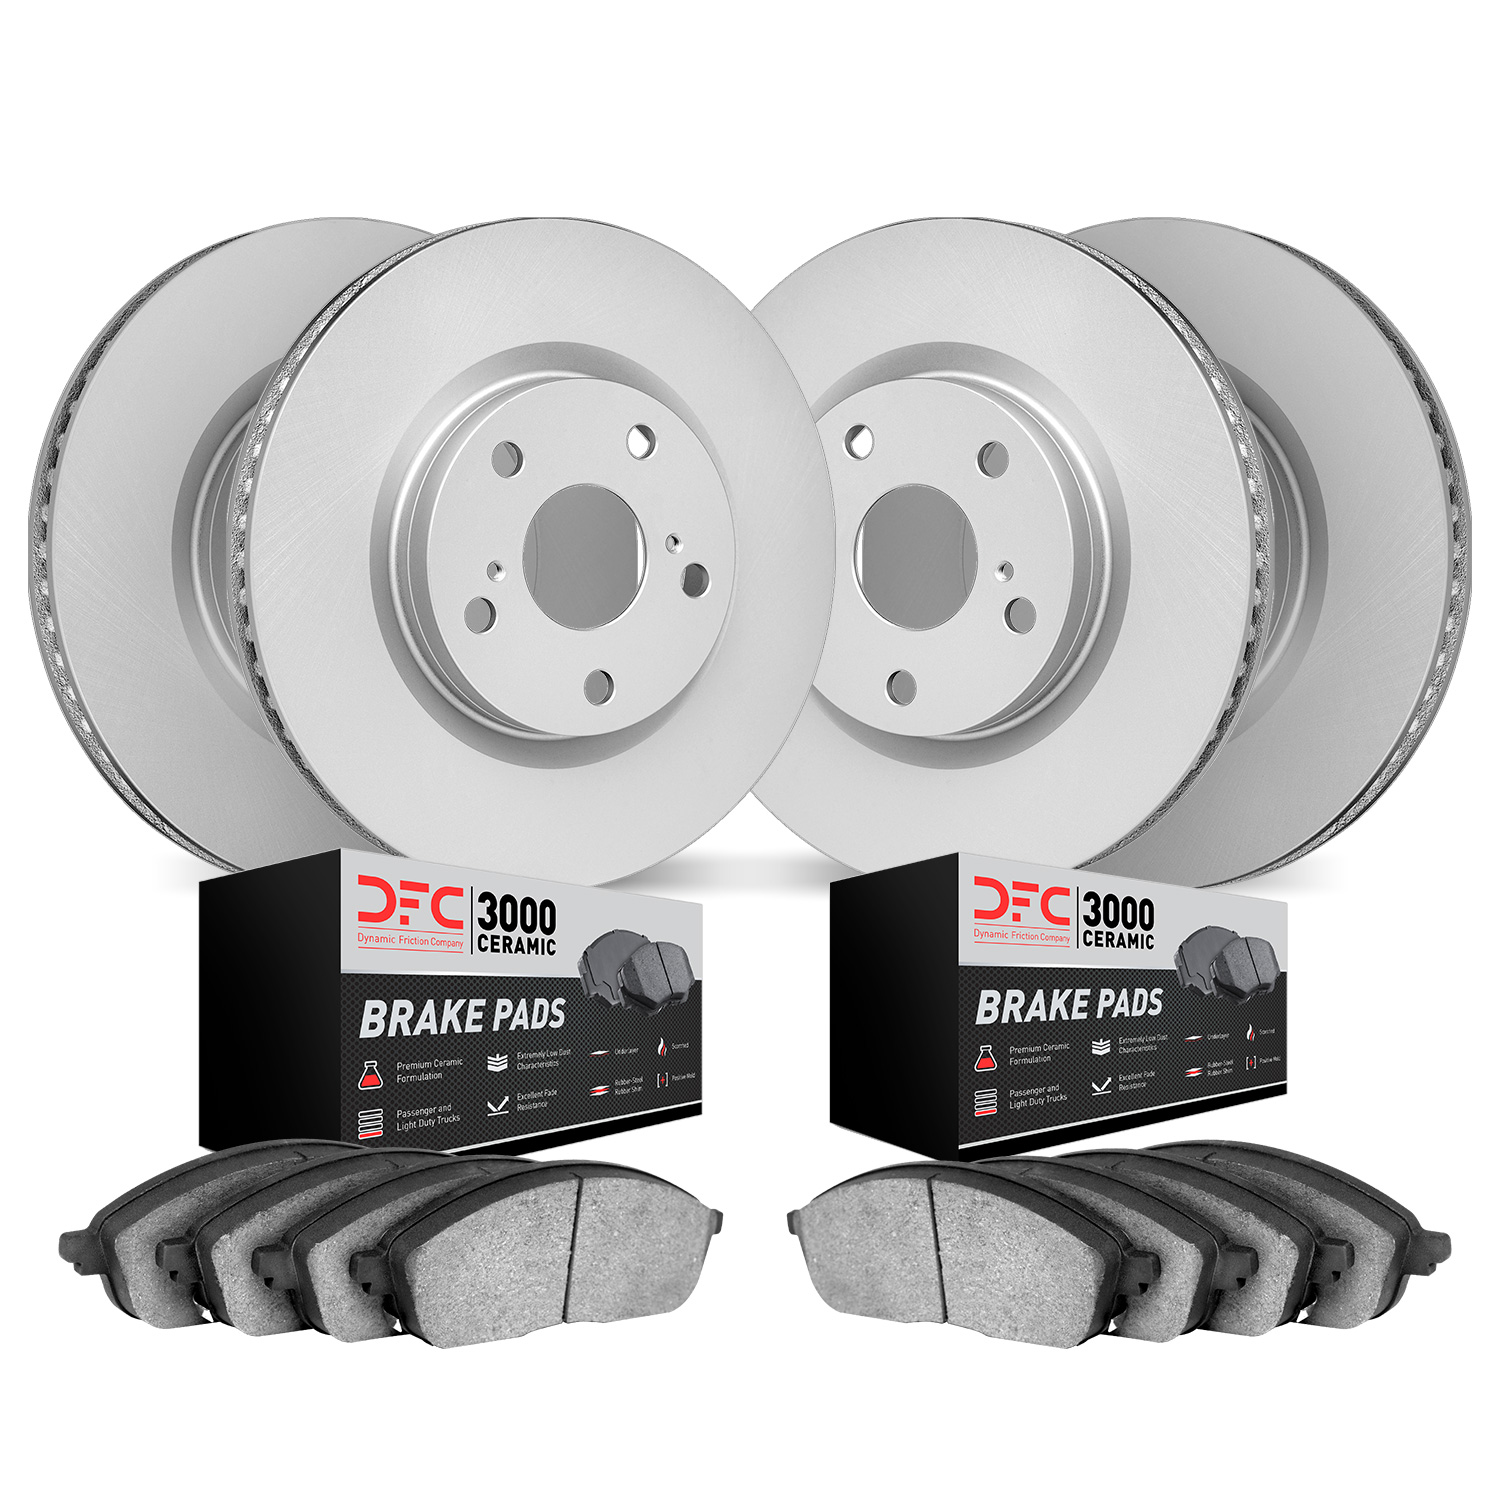 4304-63054 Geospec Brake Rotors with 3000-Series Ceramic Brake Pads Kit, 2008-2017 Mercedes-Benz, Position: Front and Rear